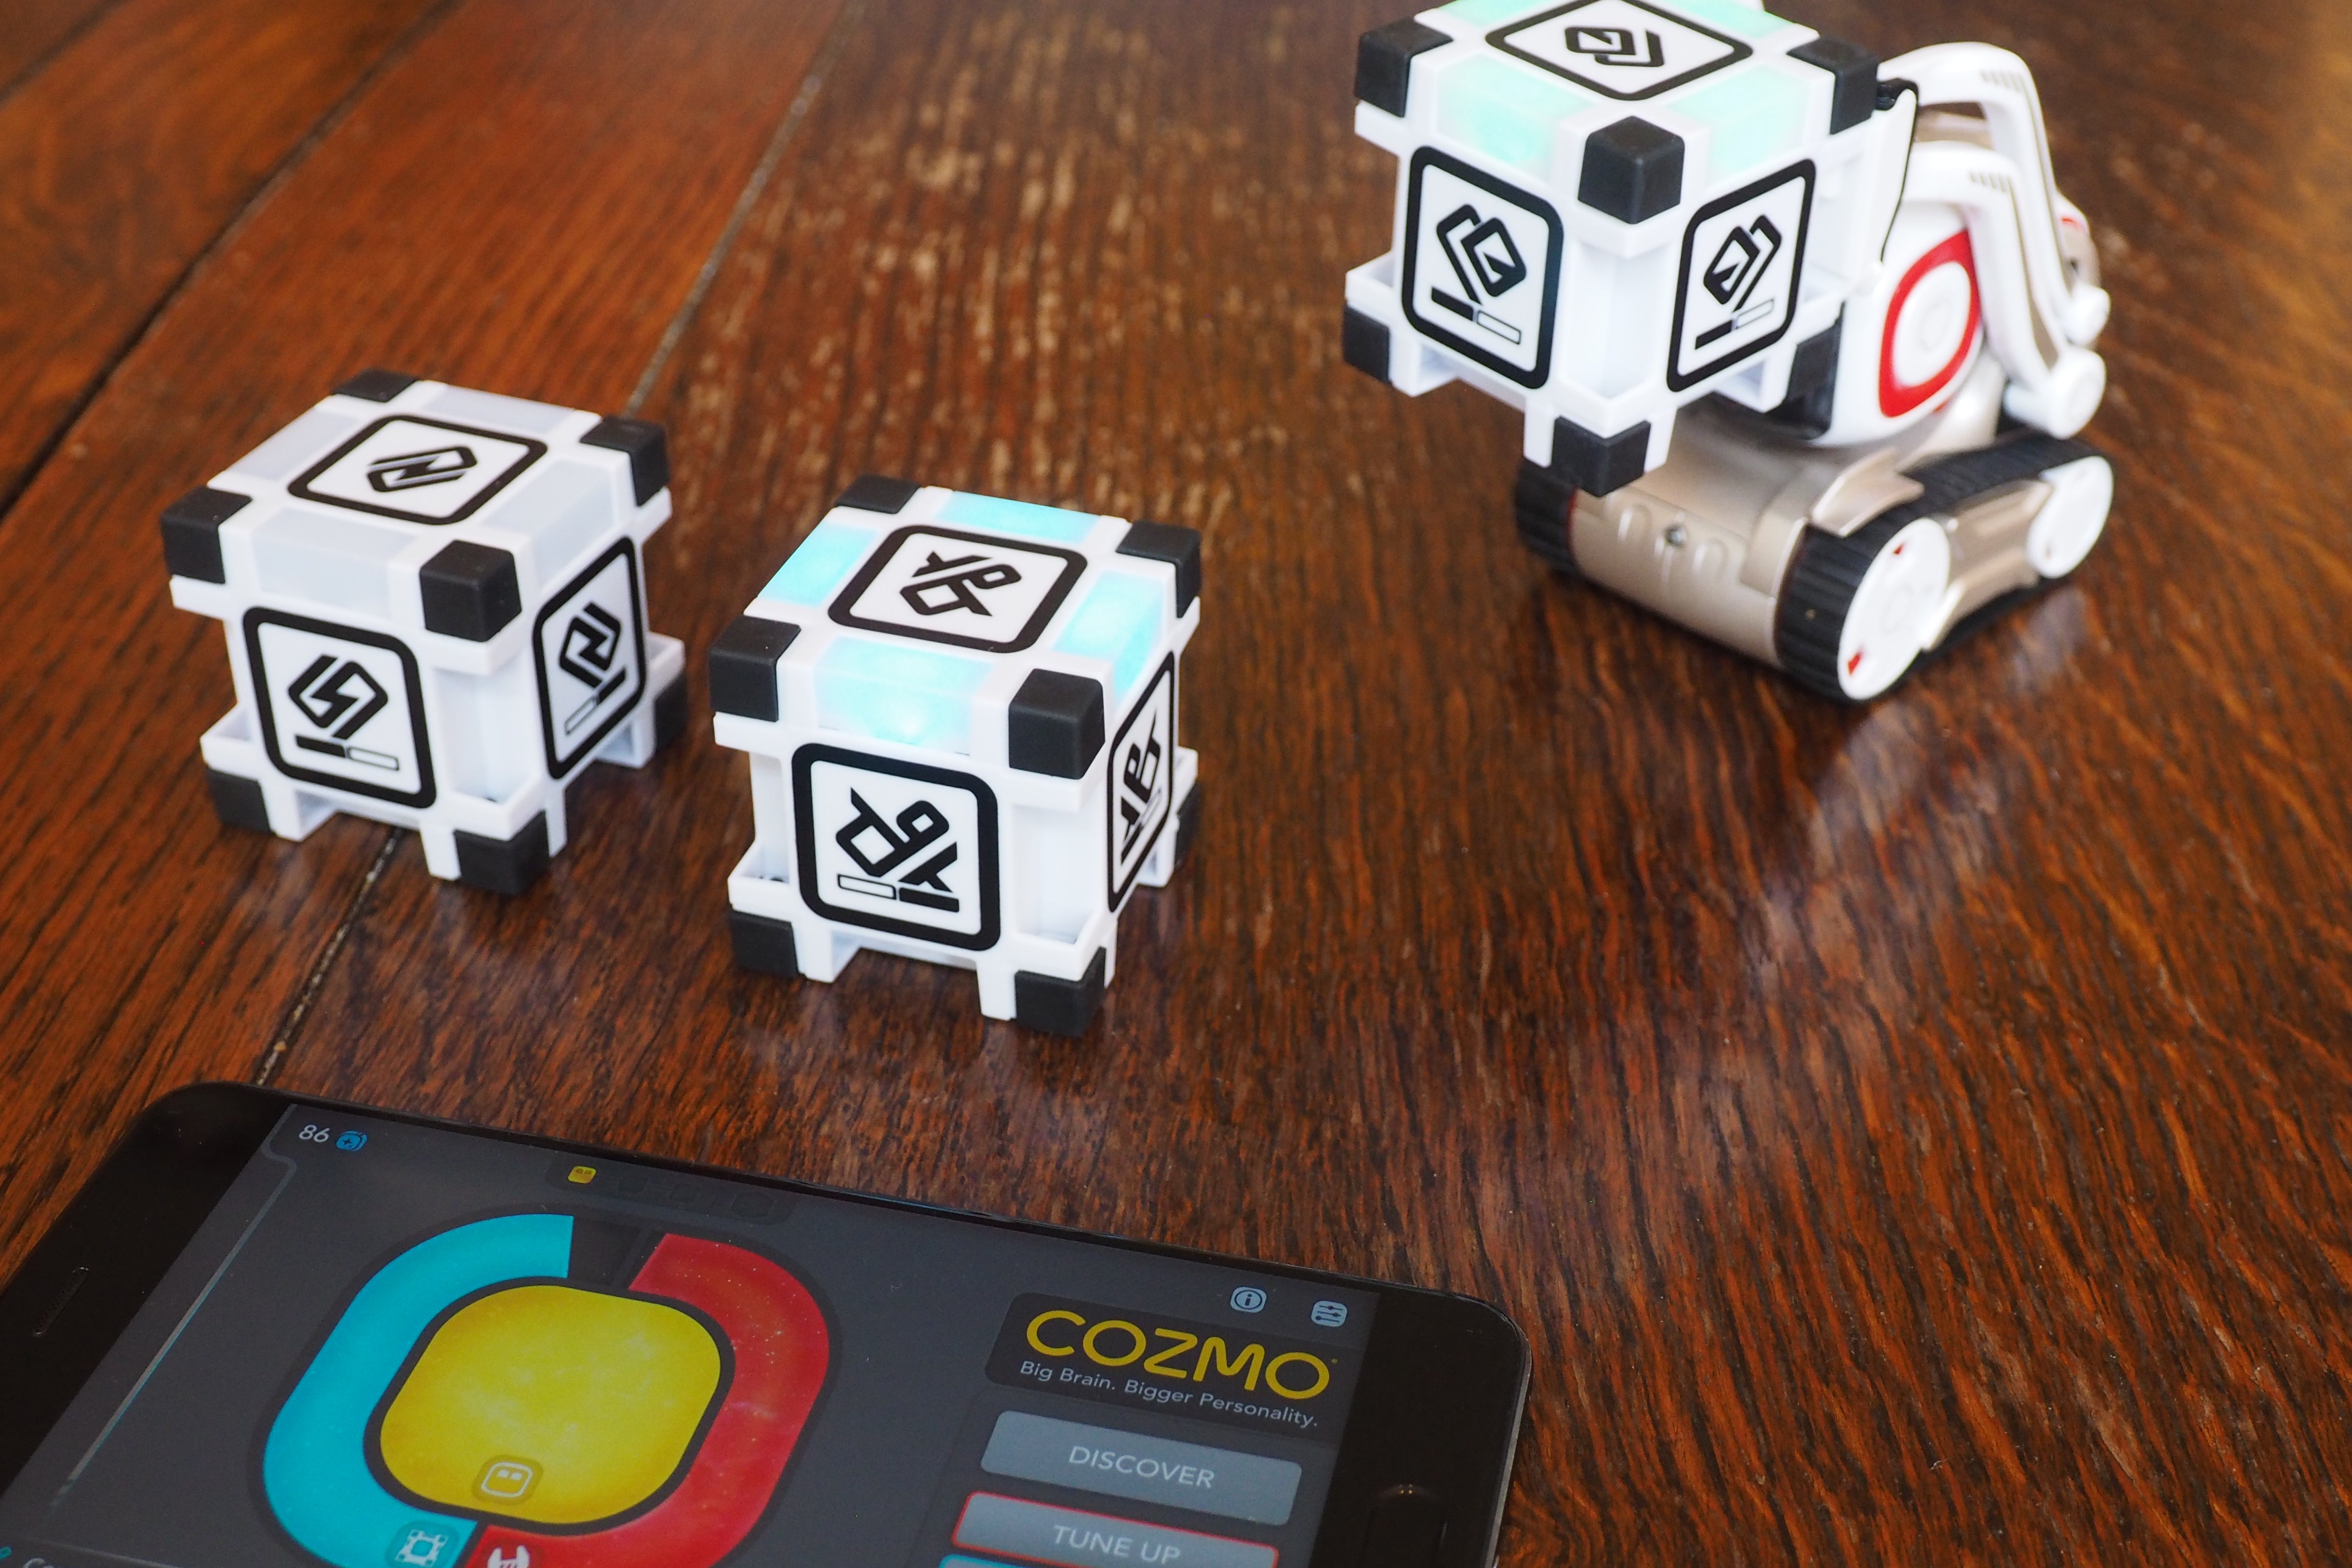 Anki Cozmo robot with interactive cubes and smartphone app.